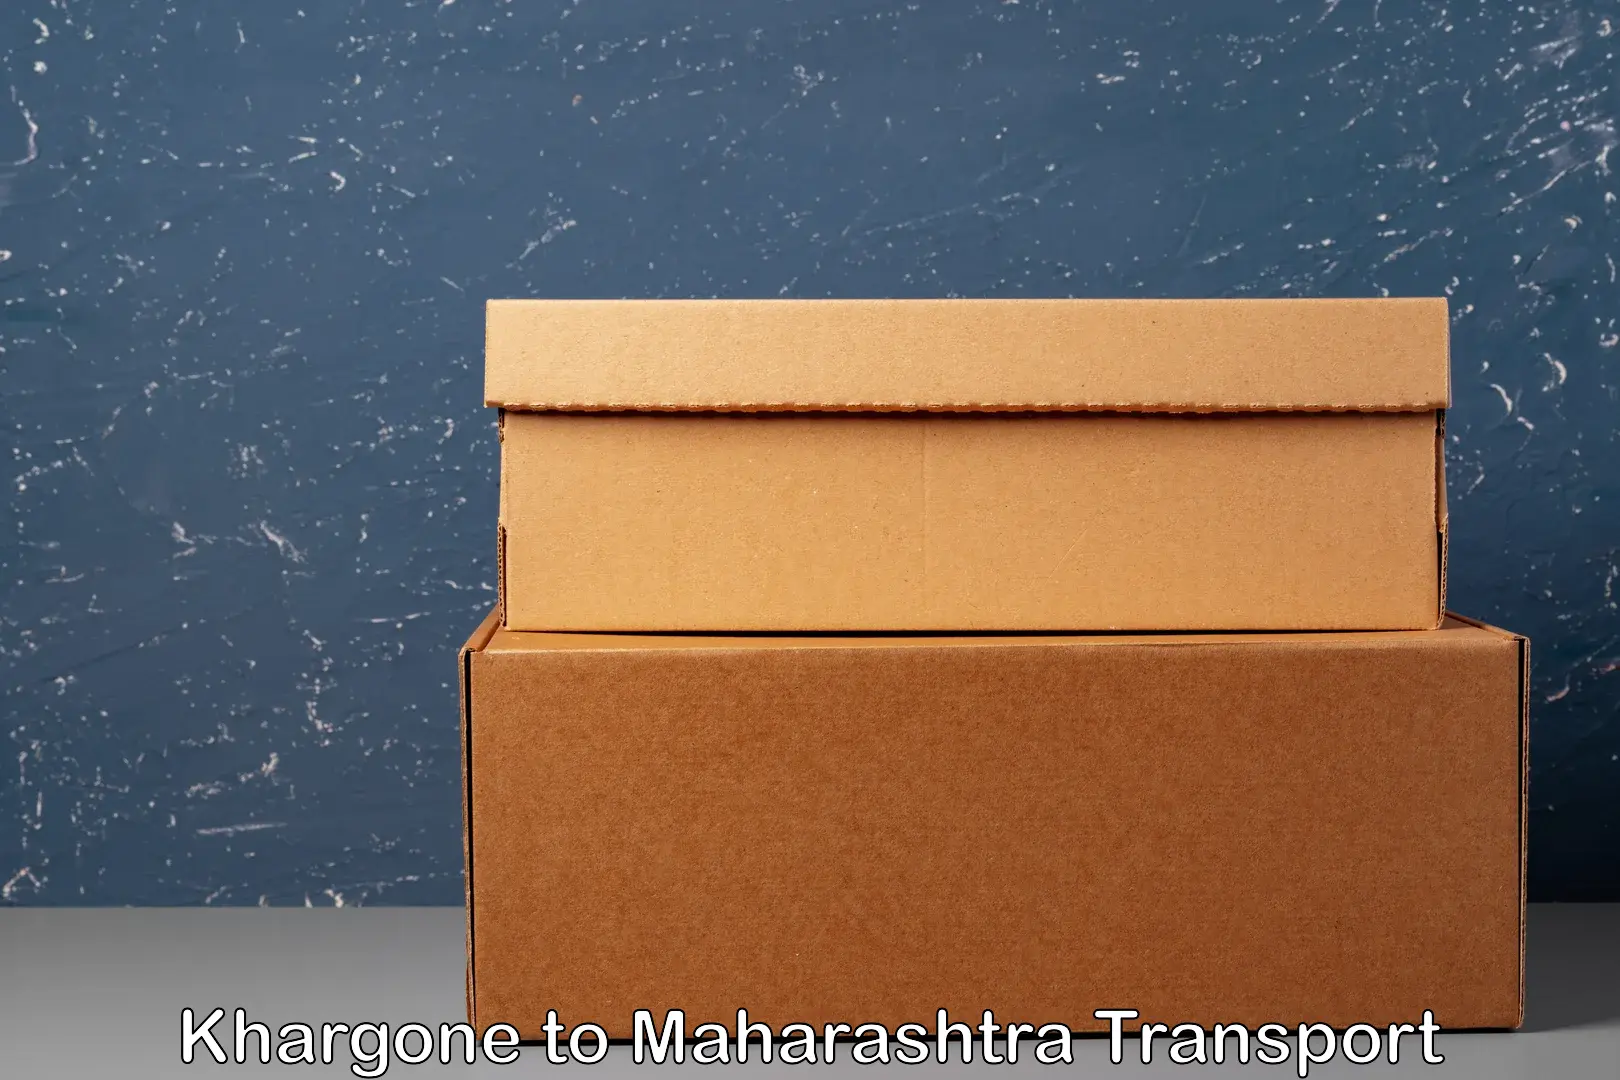 Vehicle transport services in Khargone to Panvel